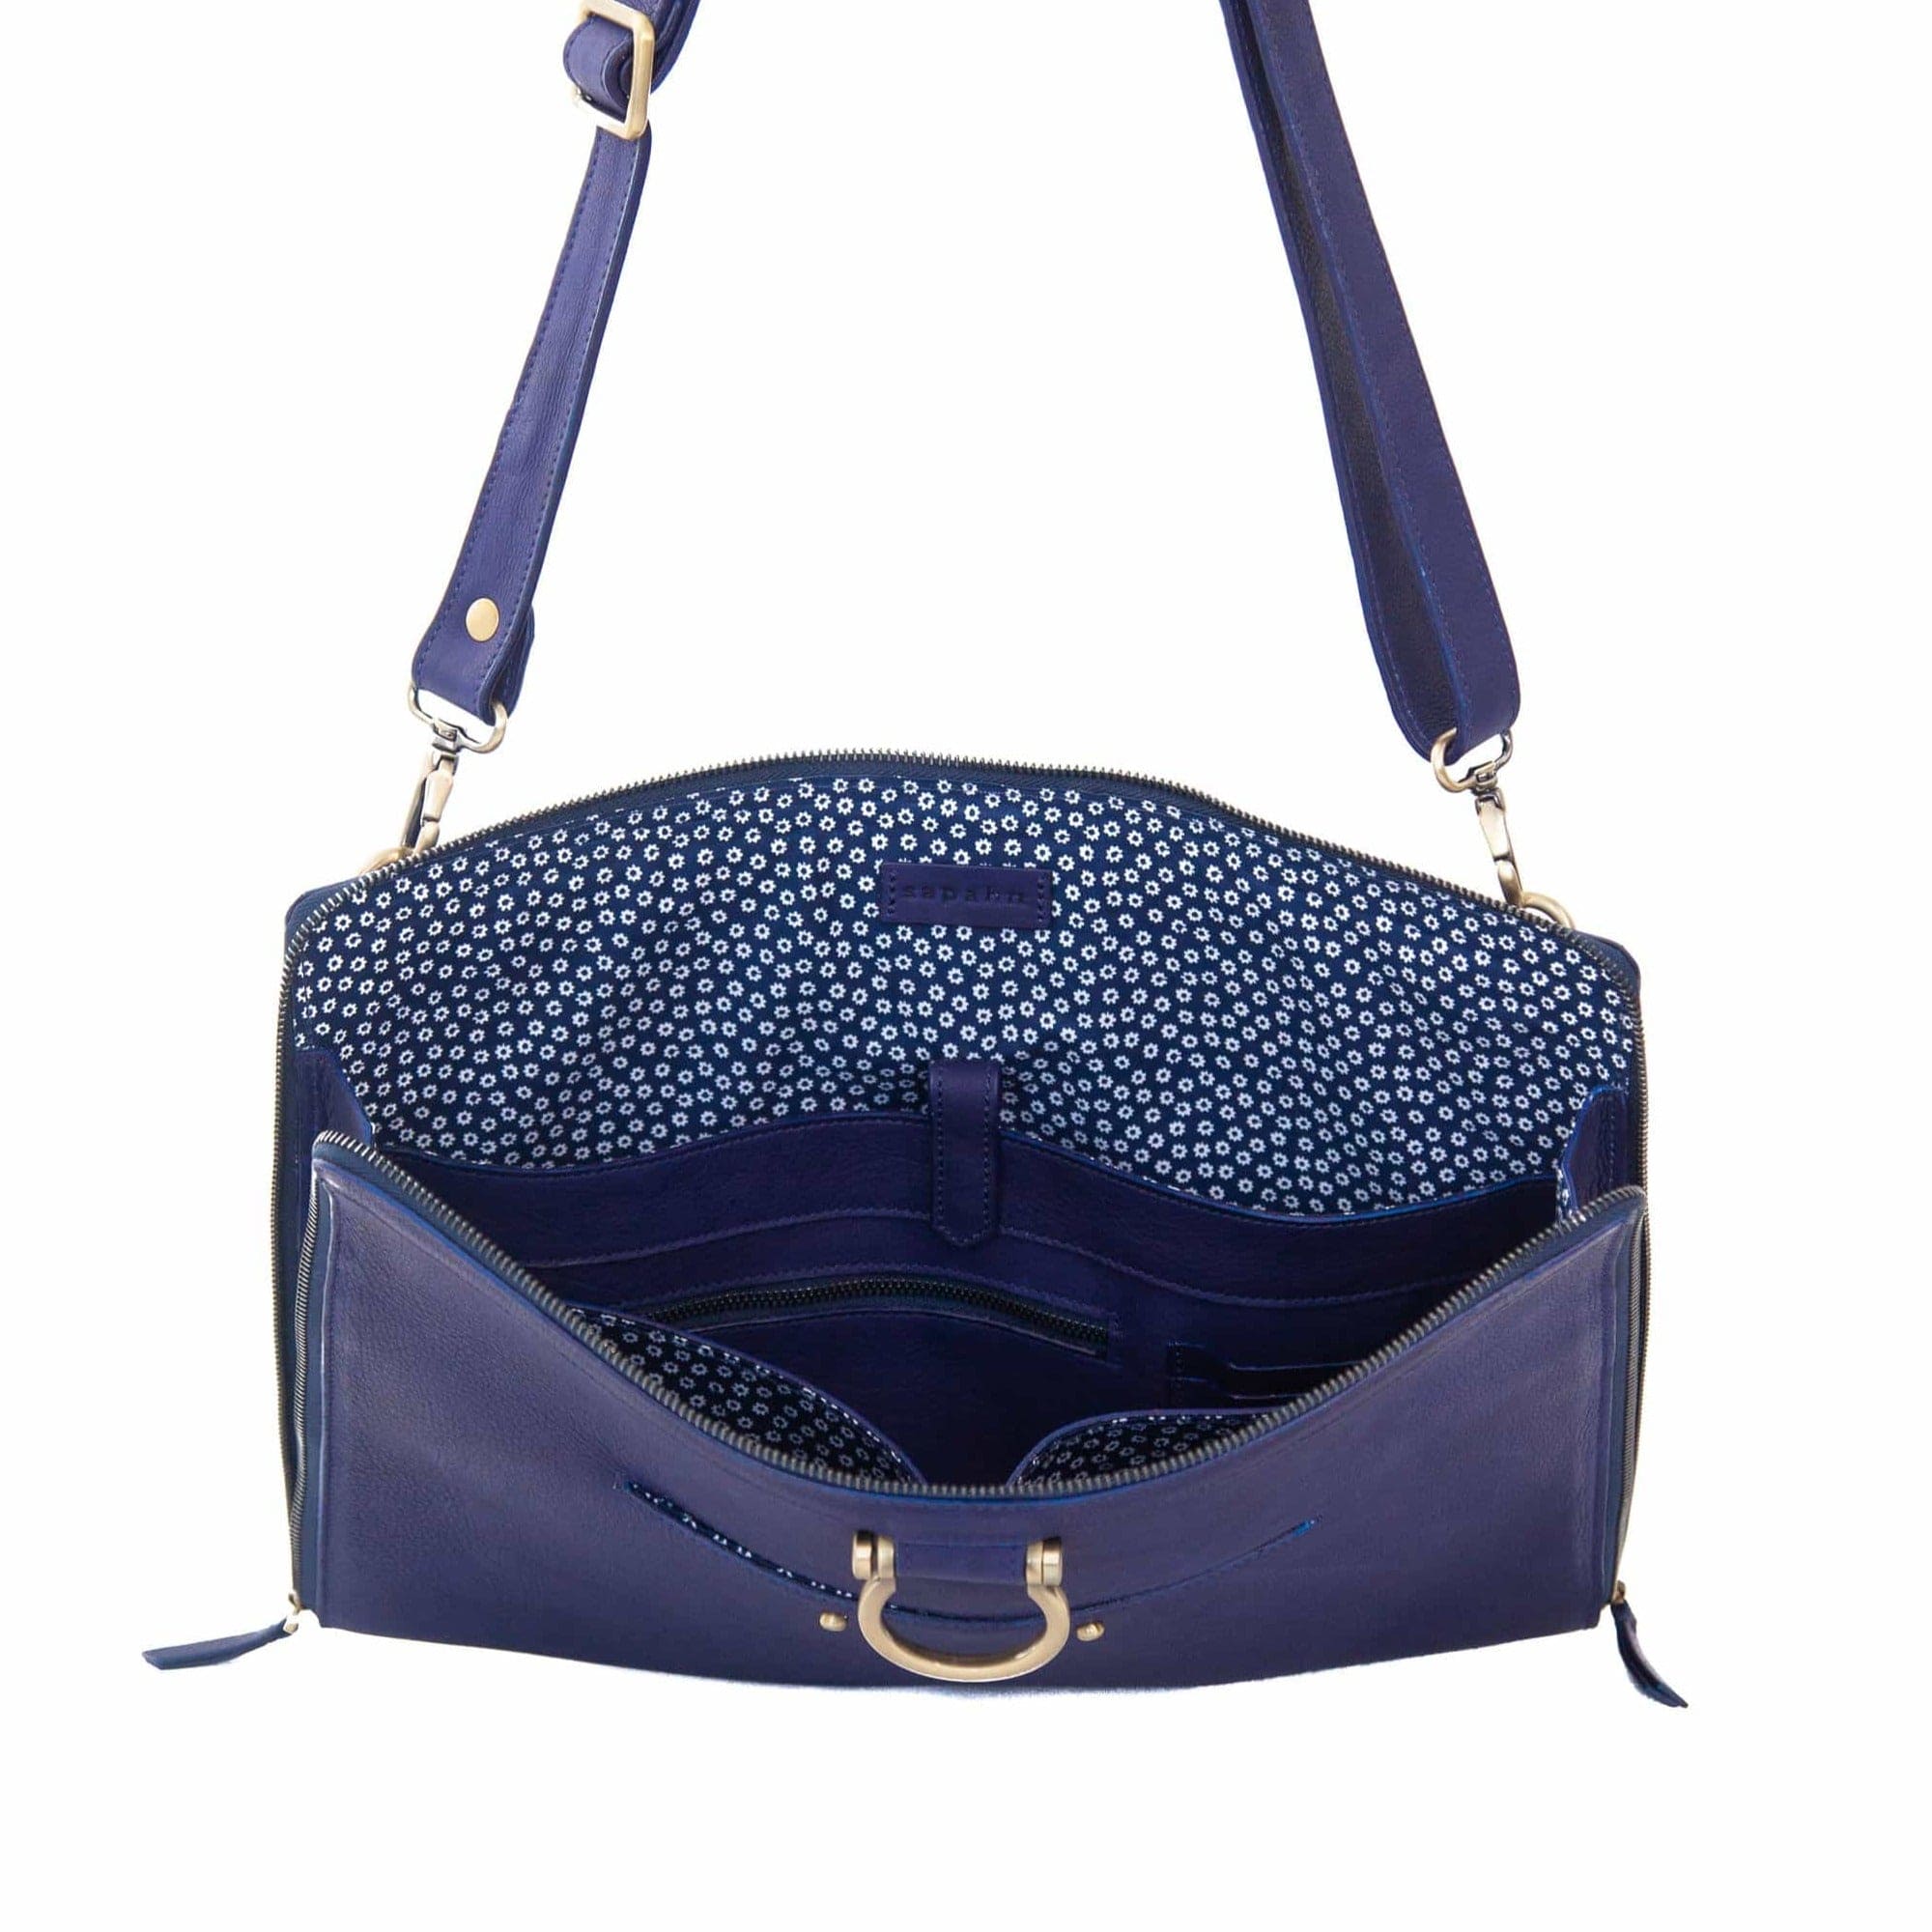 The M XL crossbody bag in indigo raw leather will hold your 15” laptop in a scratch-resistant interior sleeve.